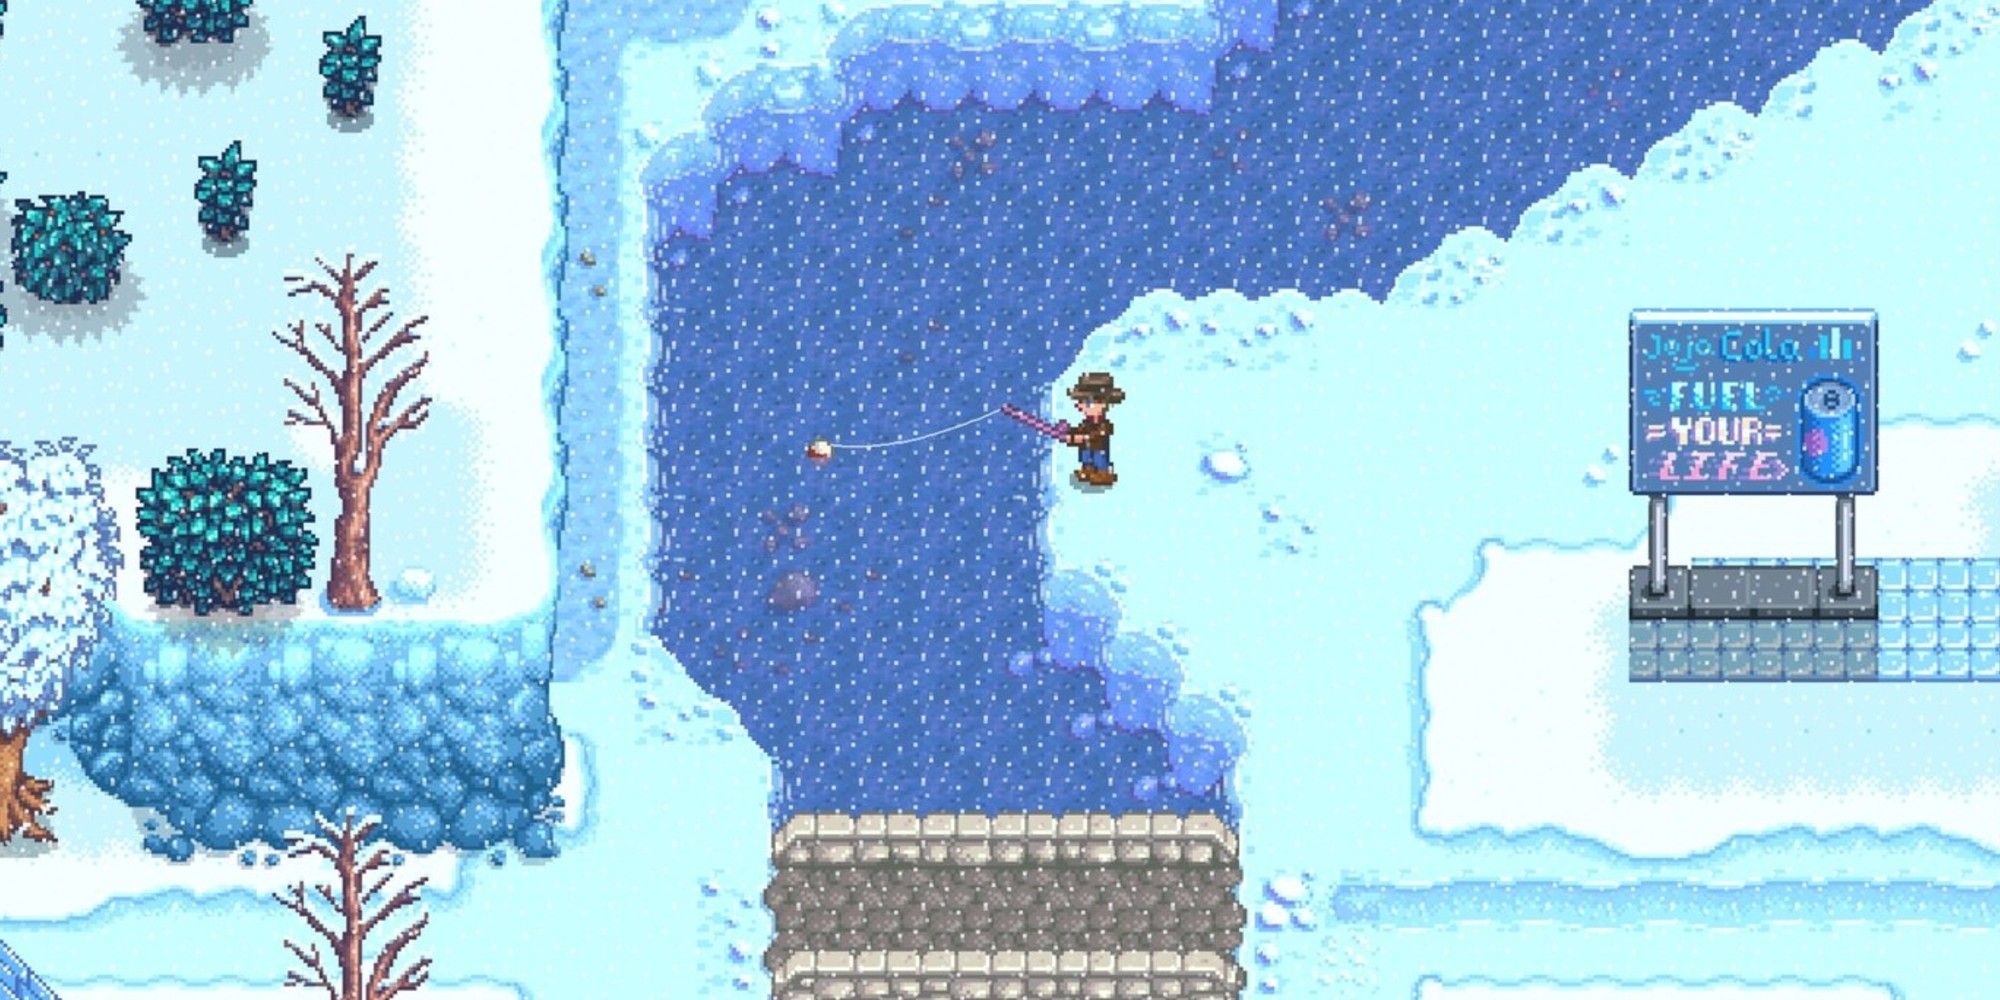 The player fishes in the city river during the winter